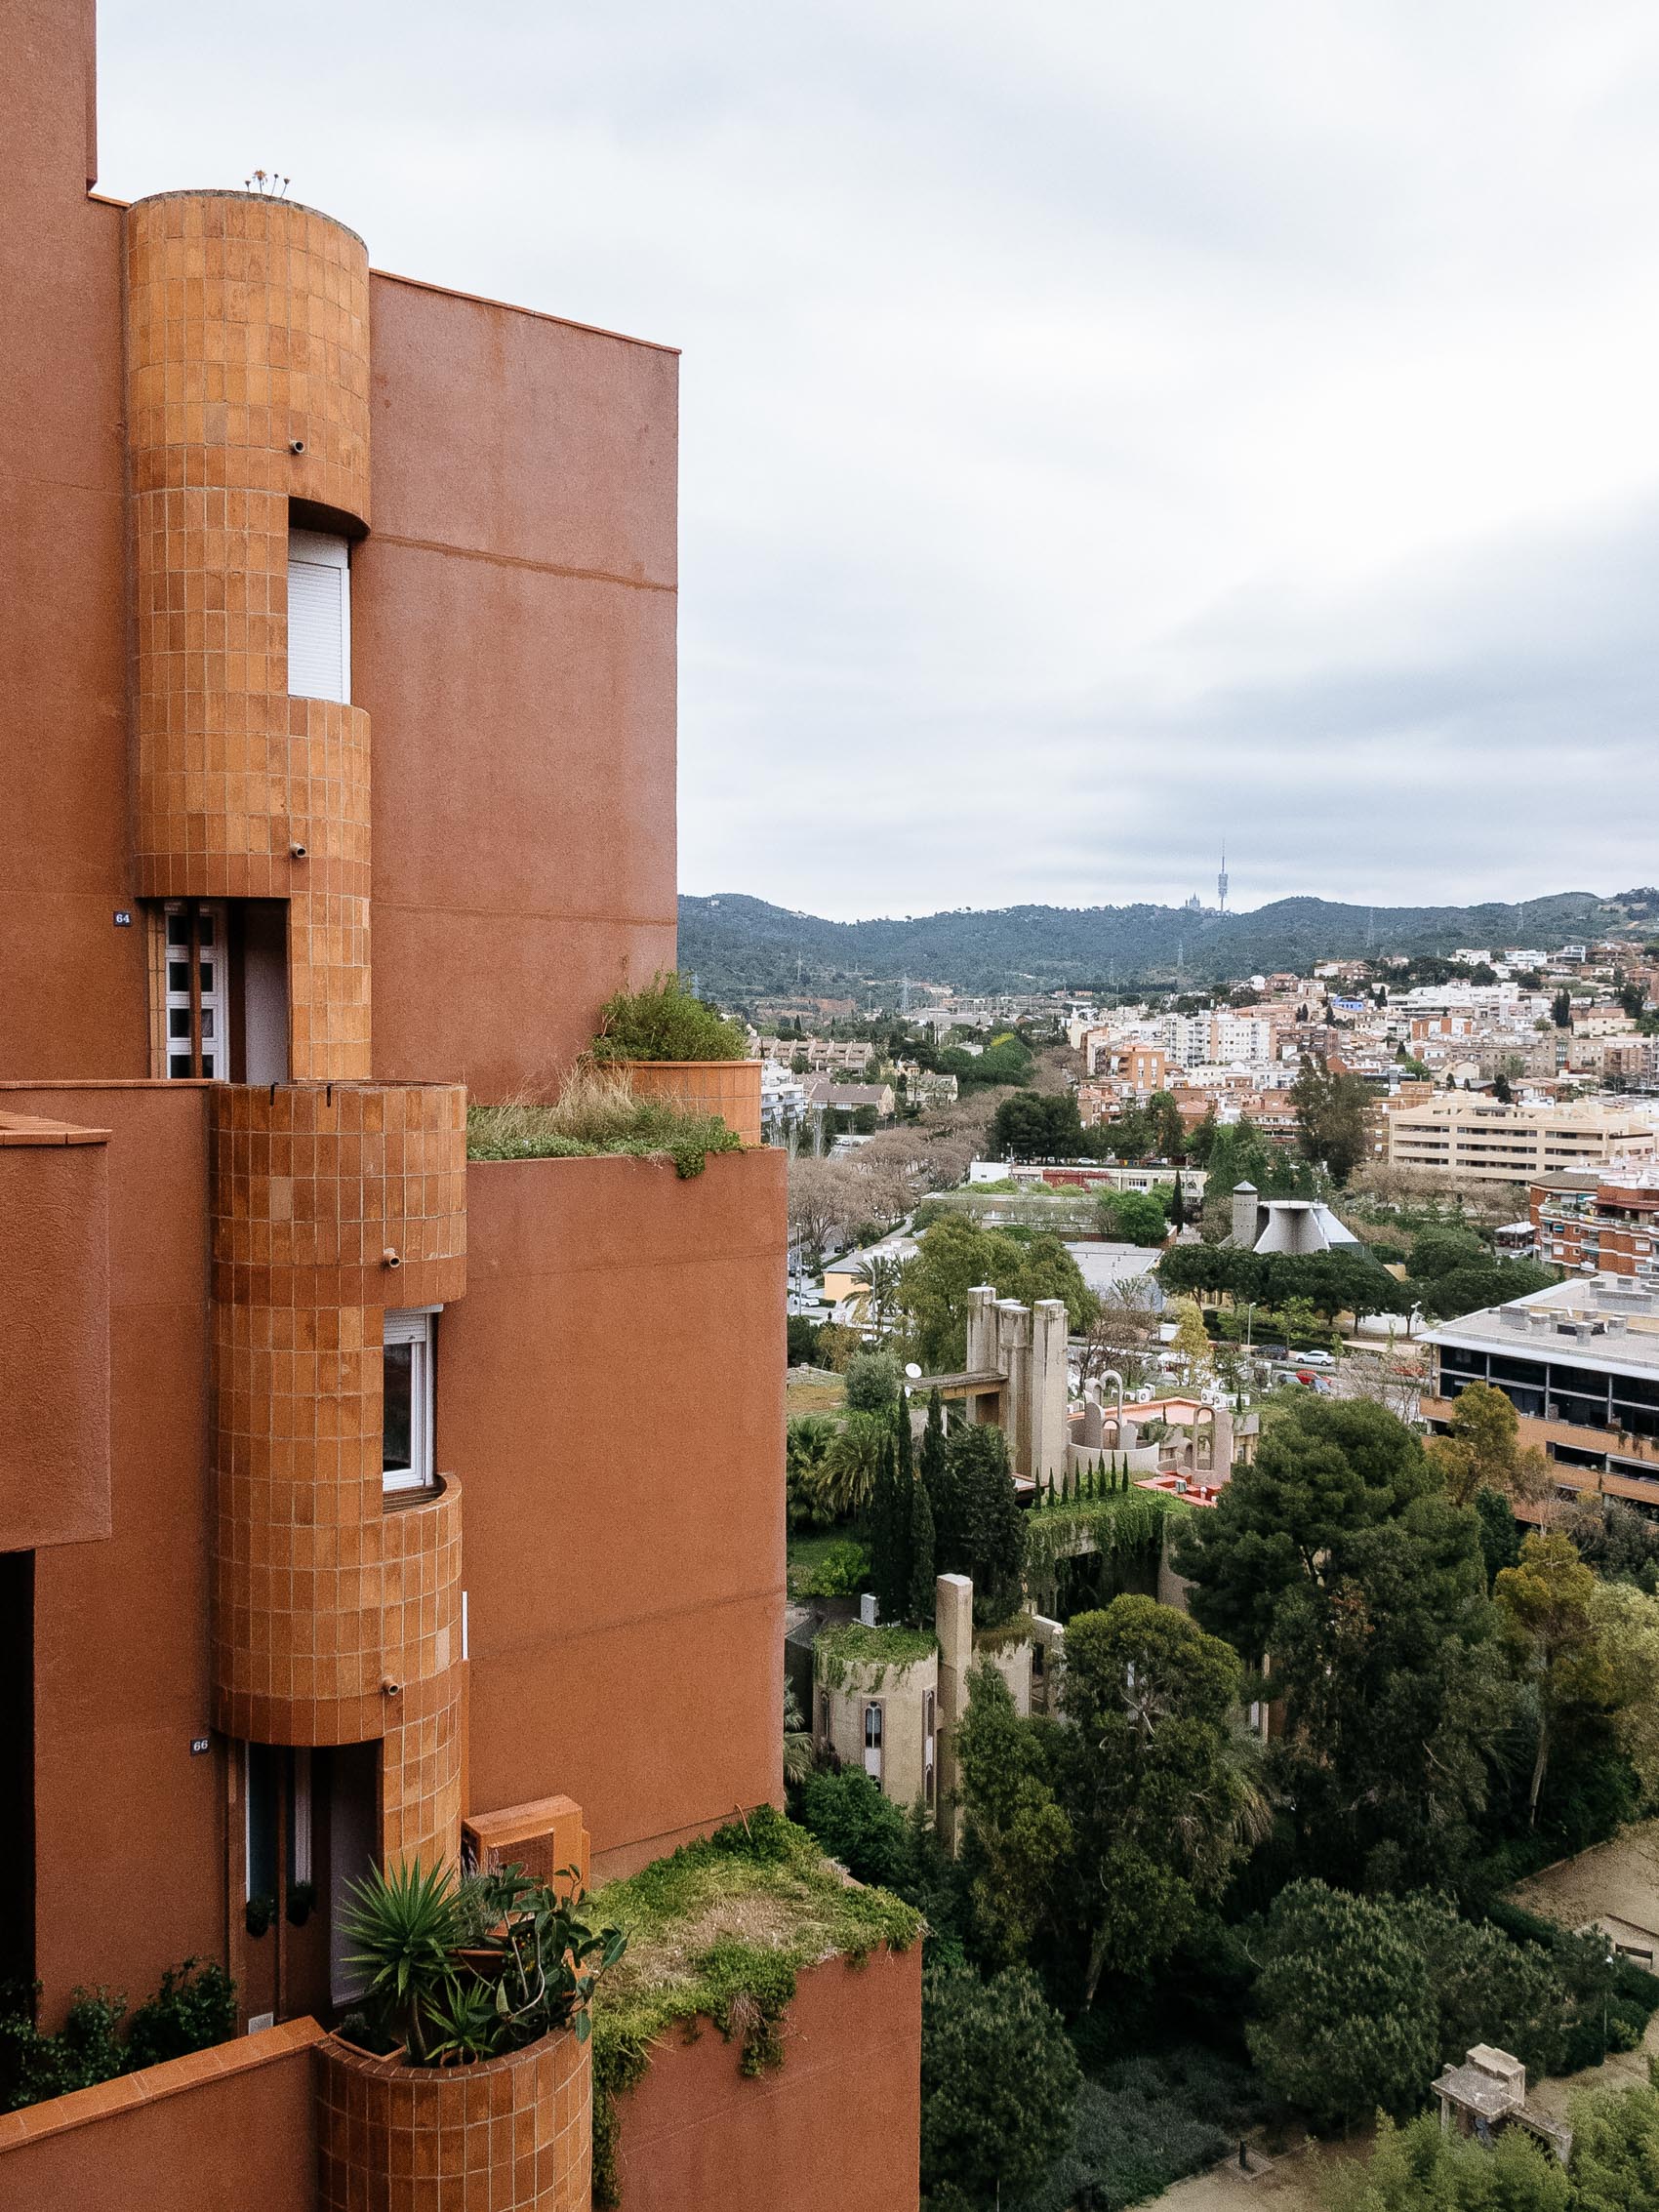 La Fabrica seen from the Walden 7 apartment building by Ricardo Bofill